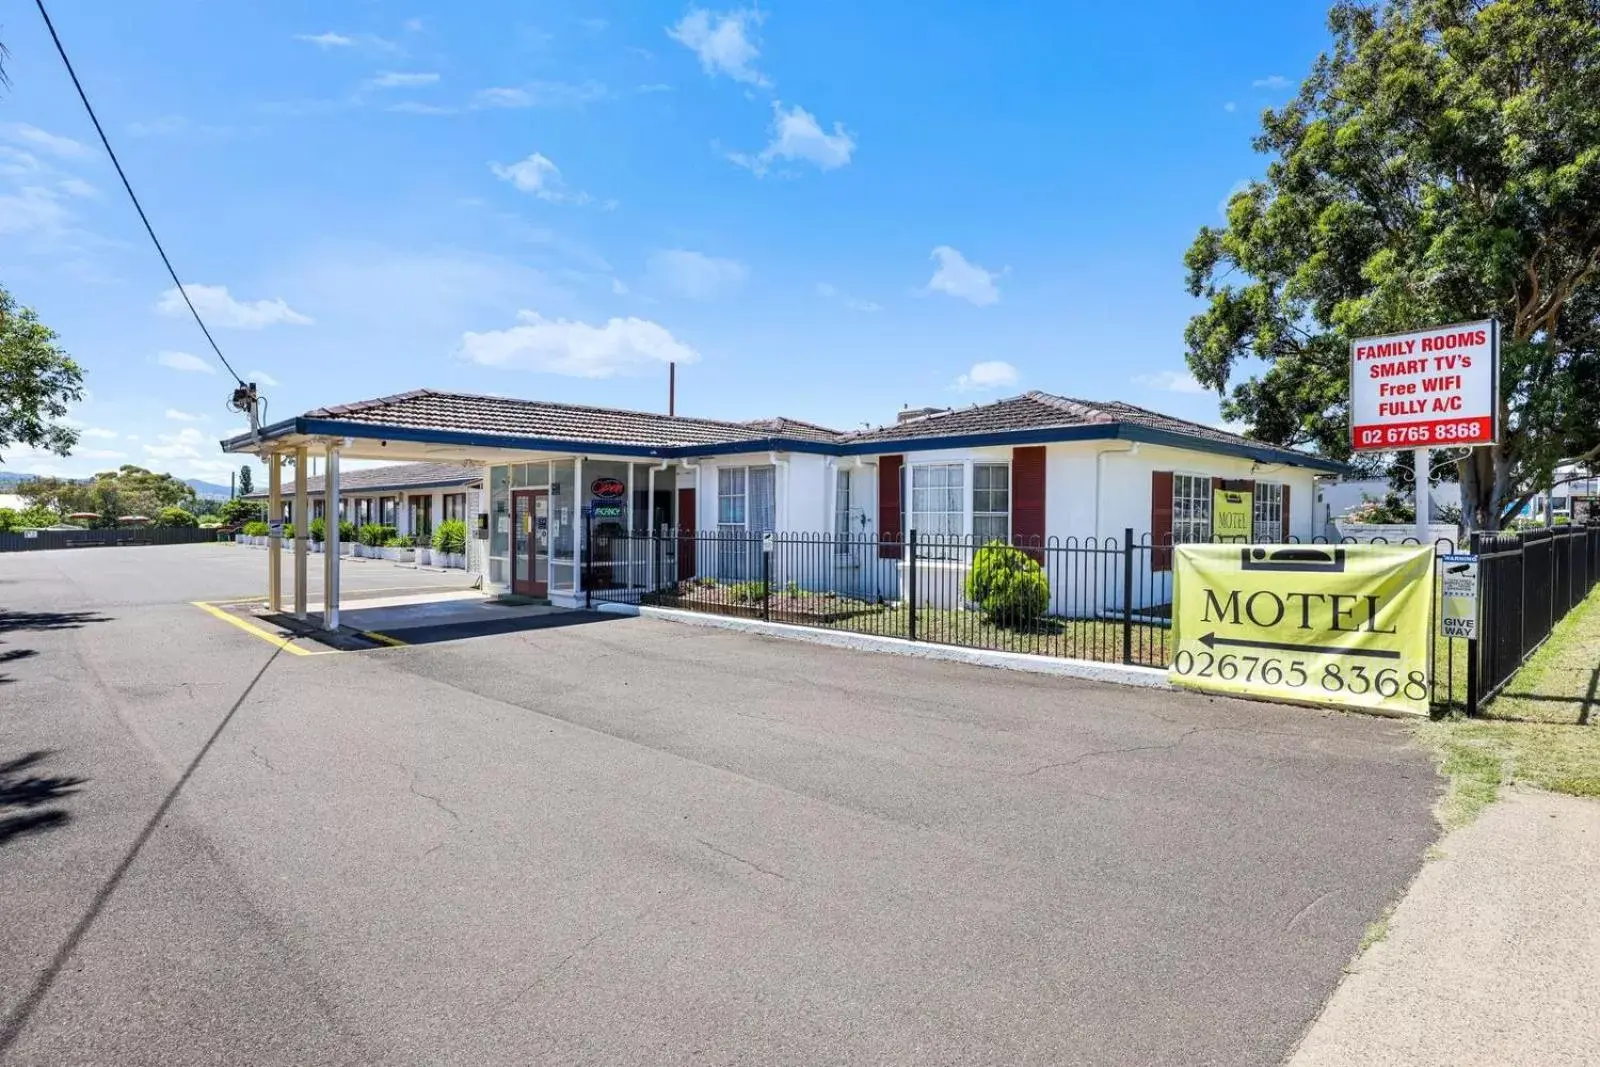 Property Building in Tamworth Budget Motel